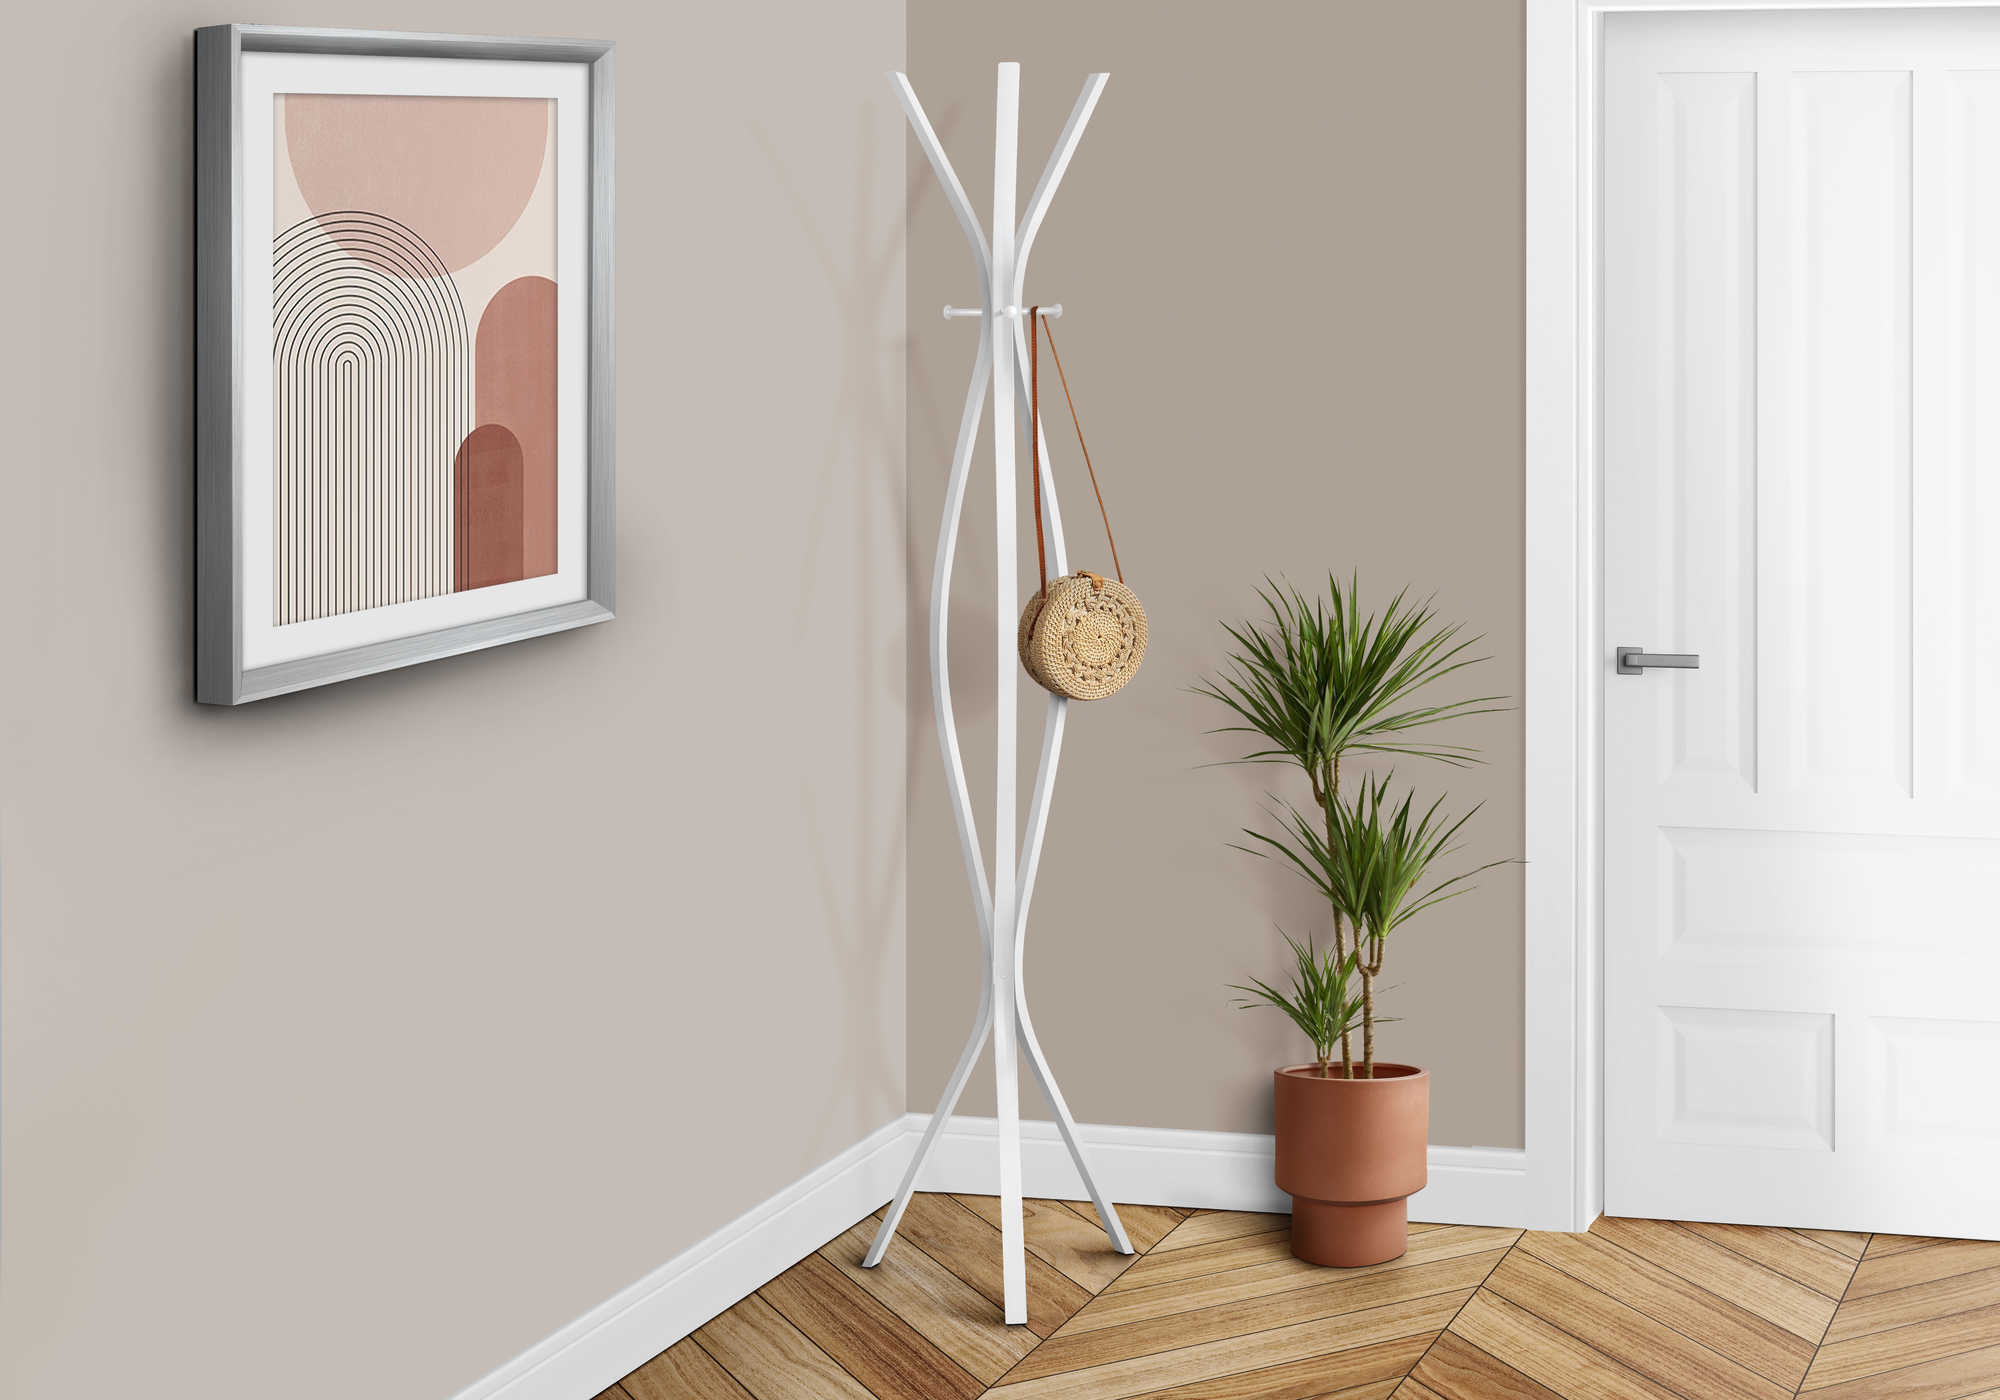 COAT RACK - 72"H / WHITE METAL CONTEMPORARY STYLE